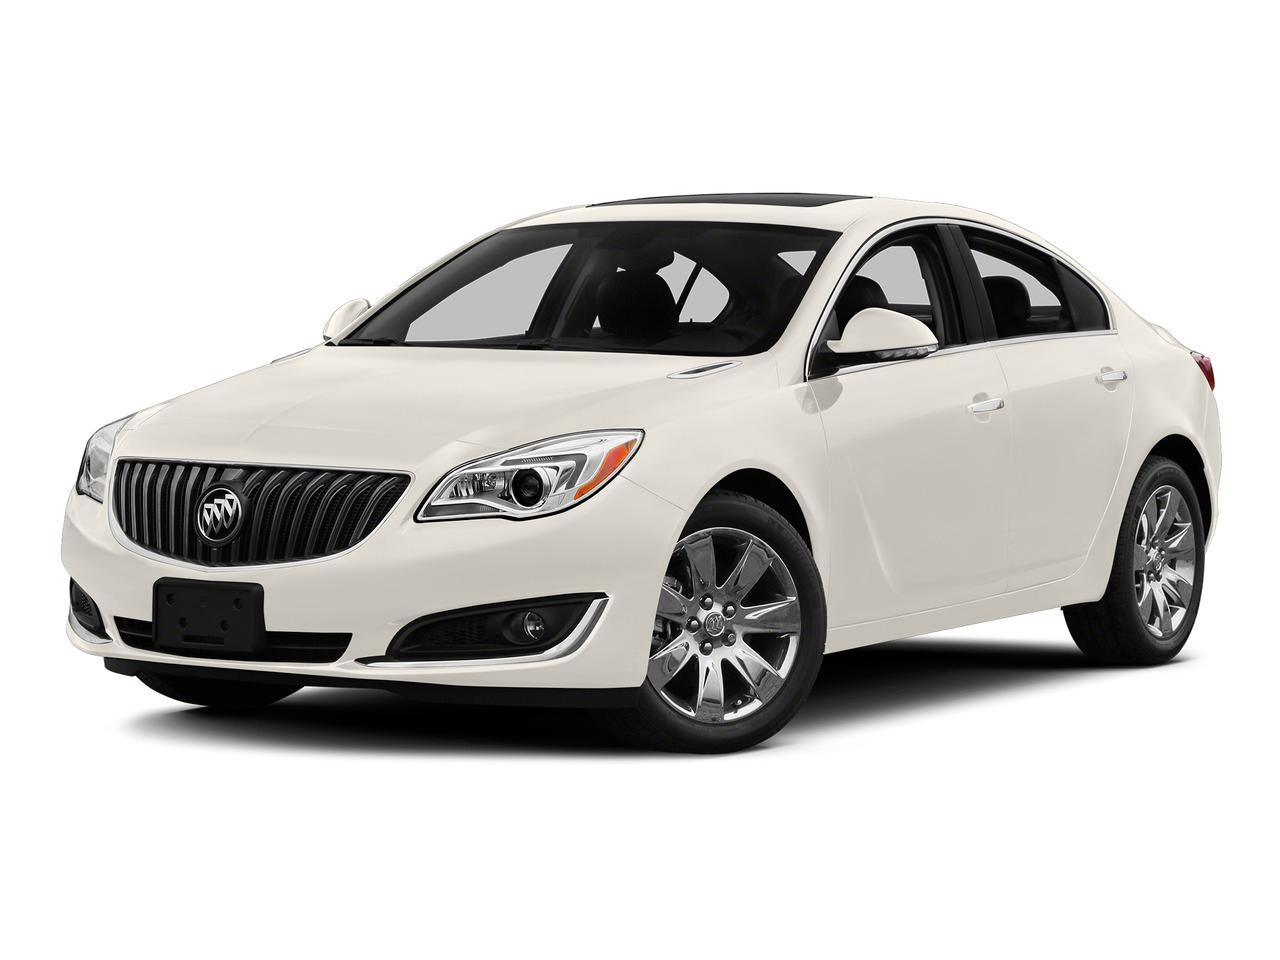 2015 Buick Regal Vehicle Photo in Grapevine, TX 76051